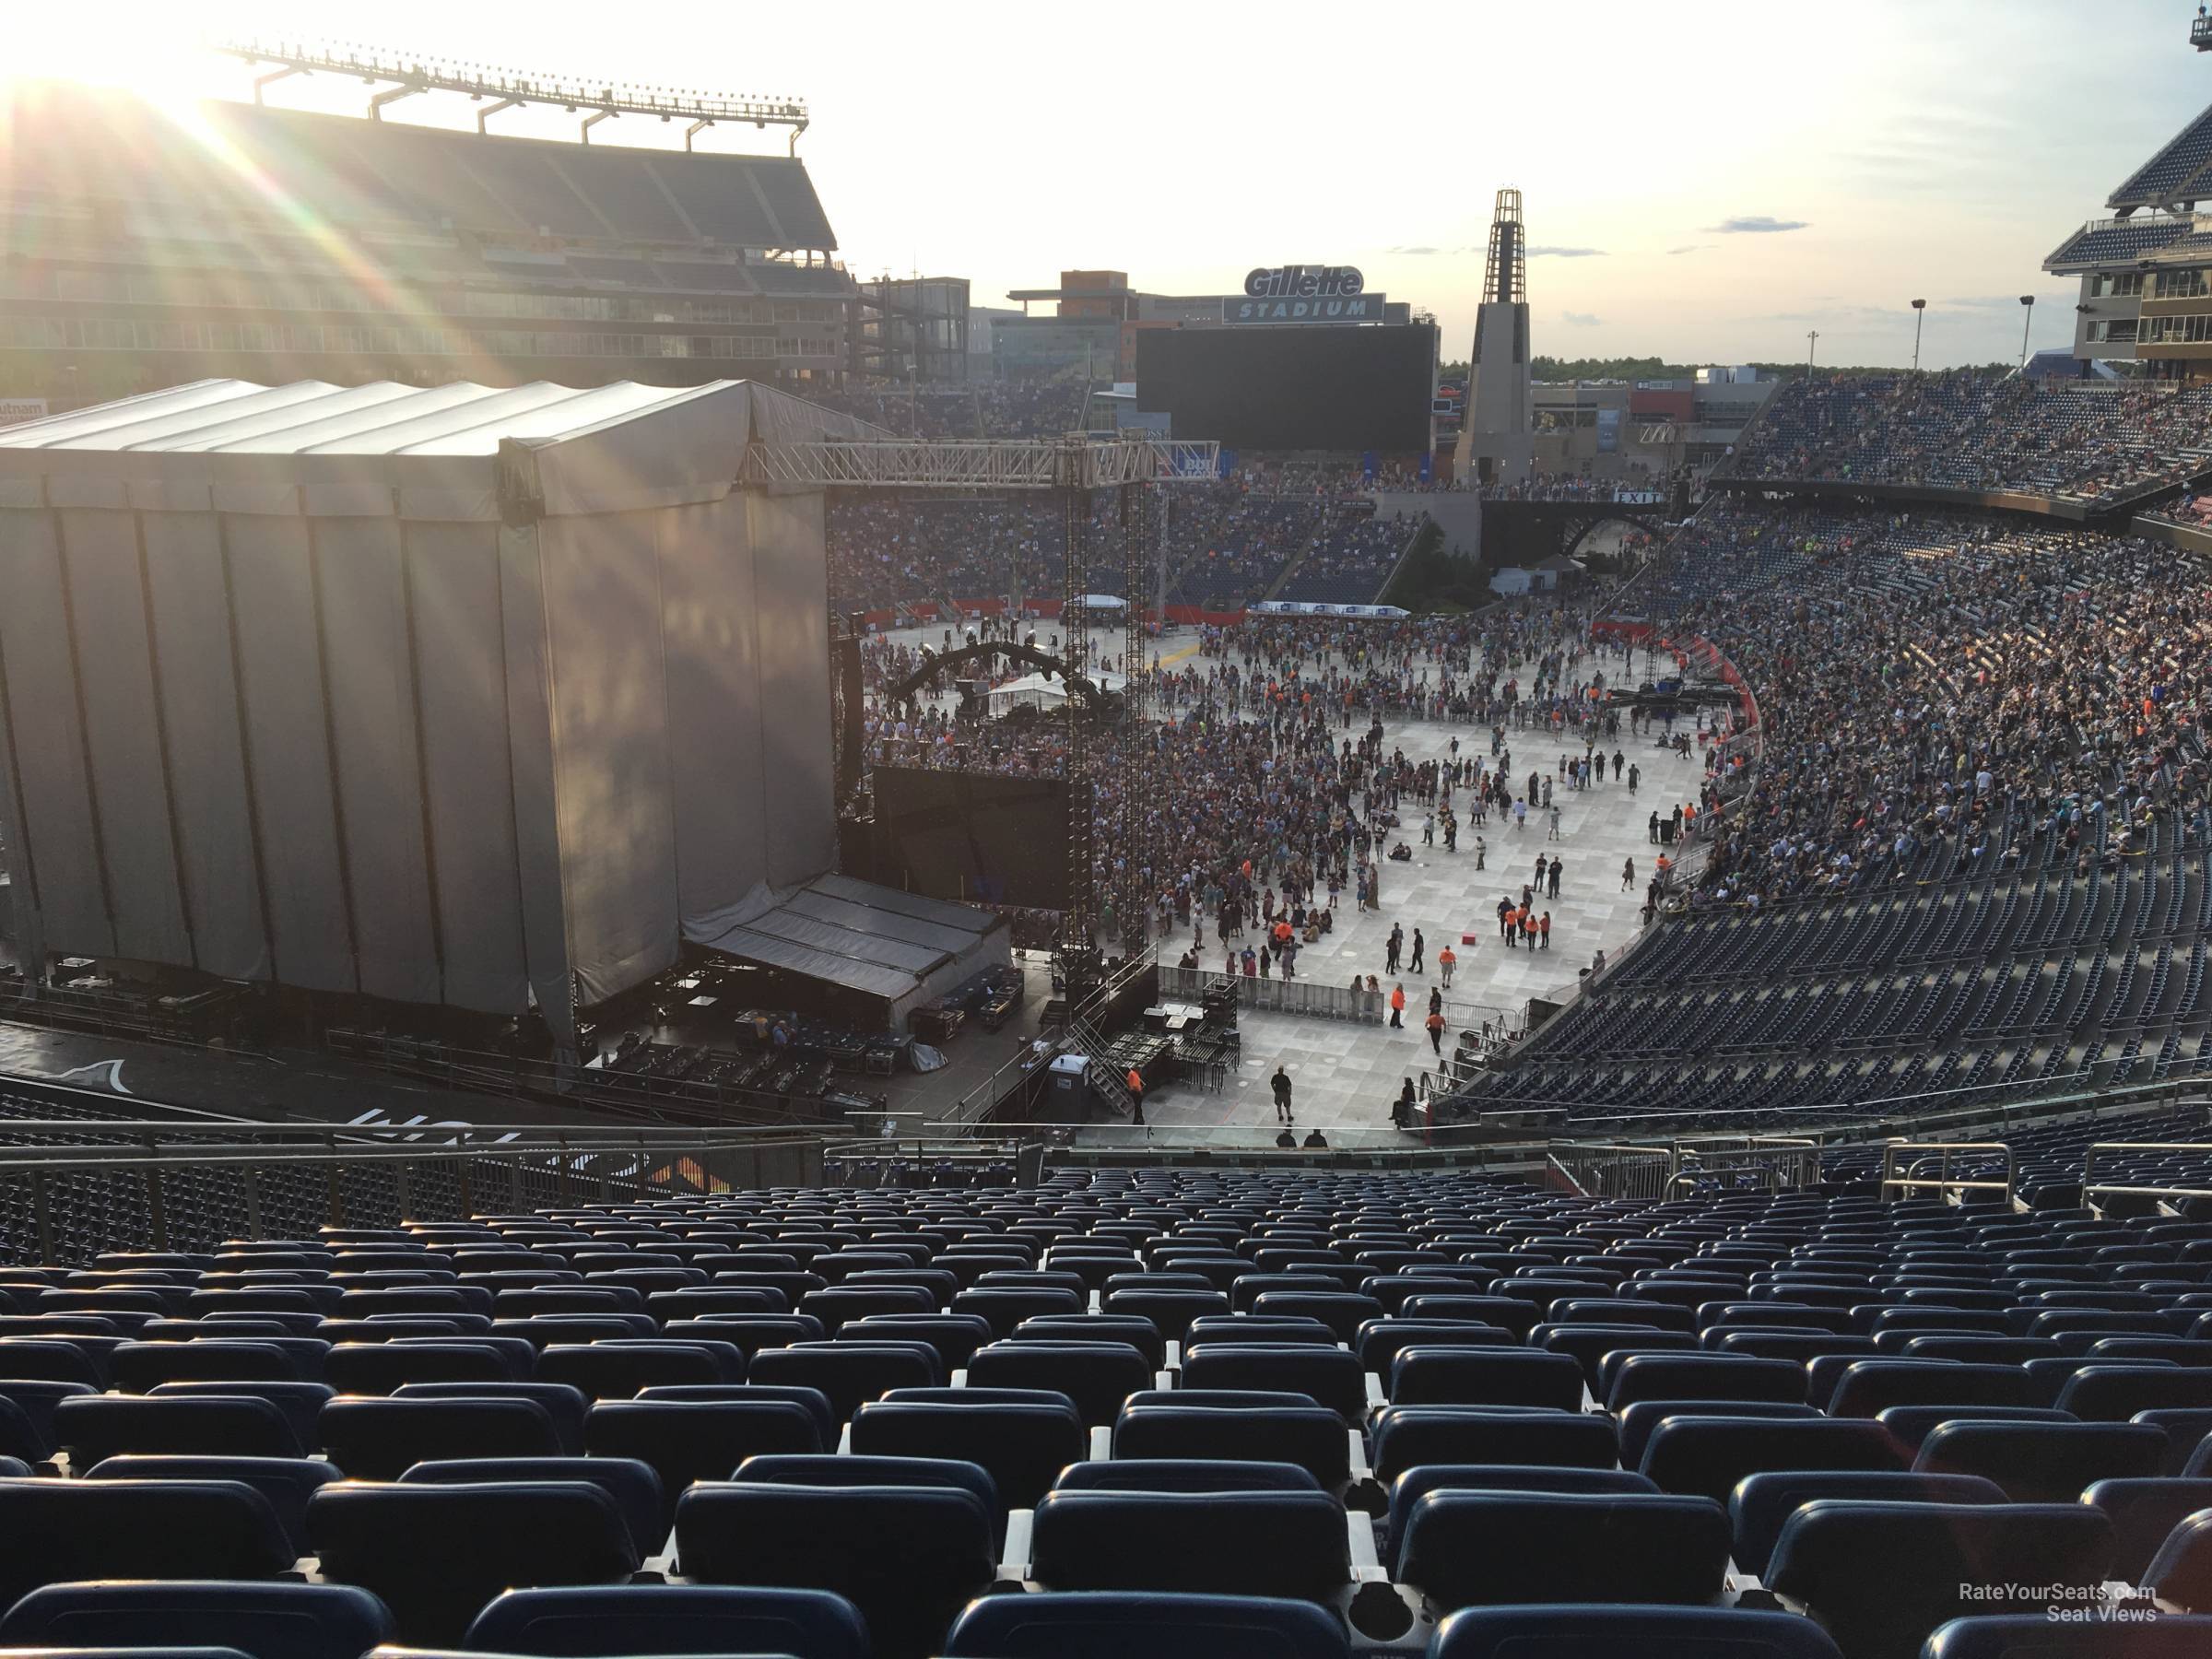 section 218, row 27 seat view  for concert - gillette stadium